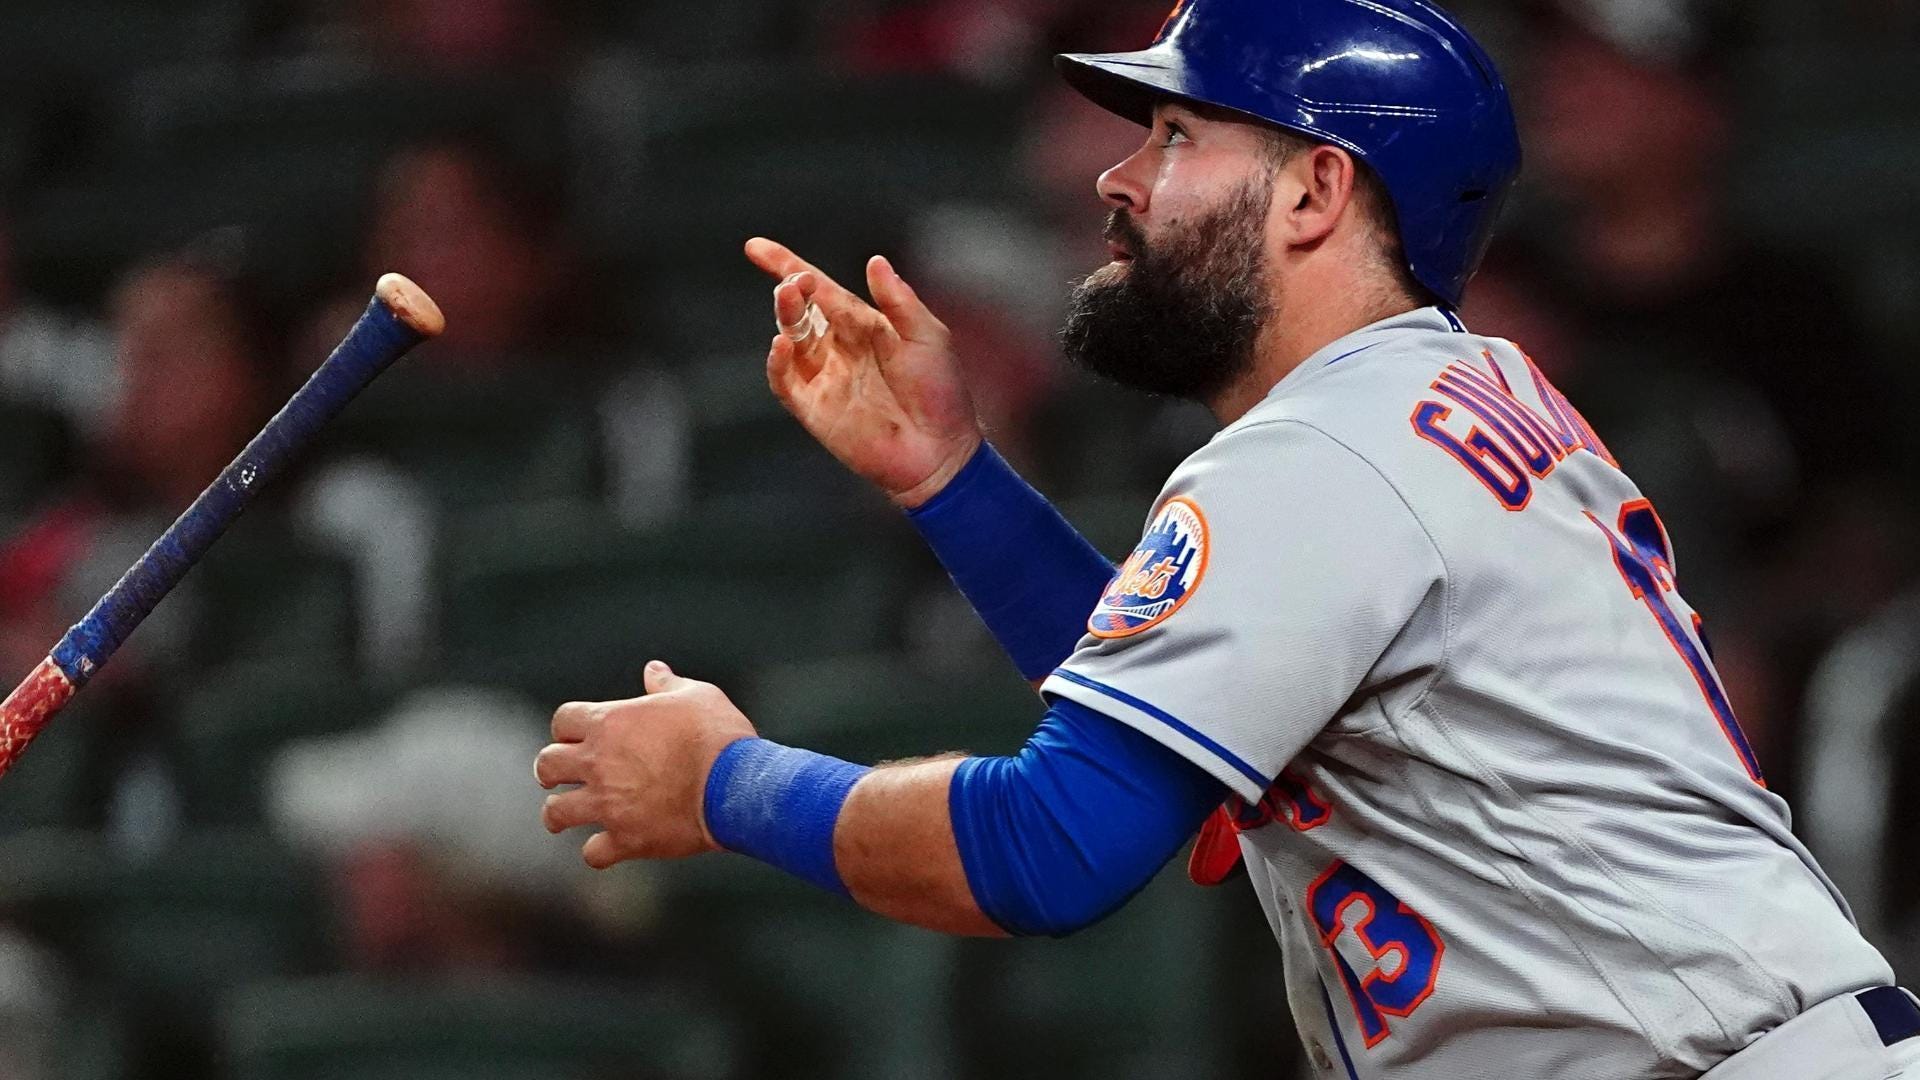 The Mets need to play Luis Guillorme more - Amazin' Avenue